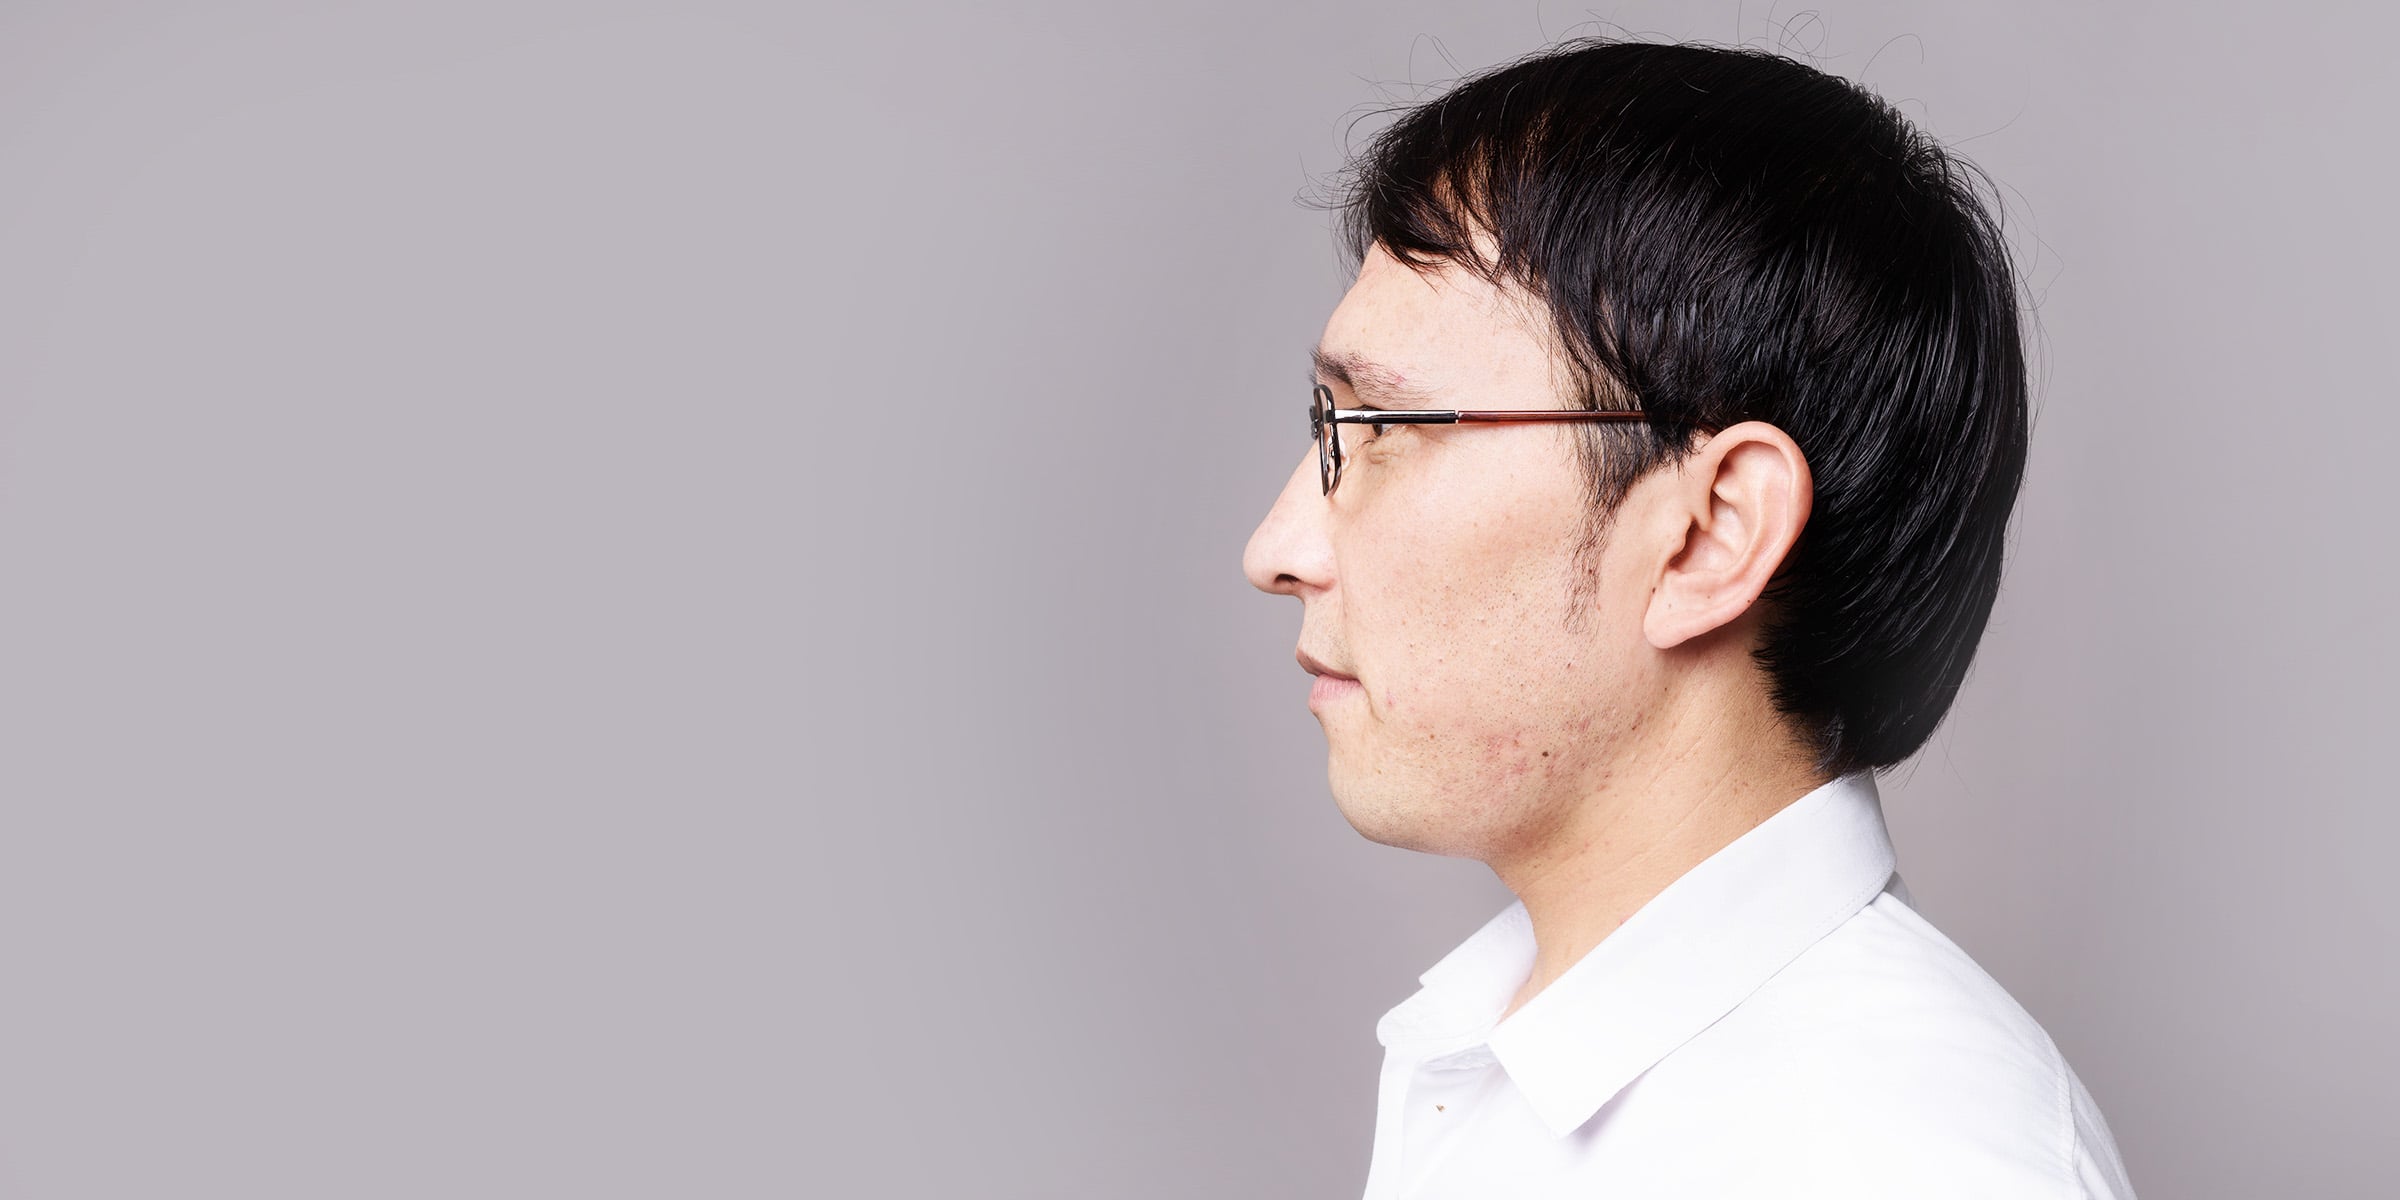 Profile of a black haired man in glasses and a white button up shirt.